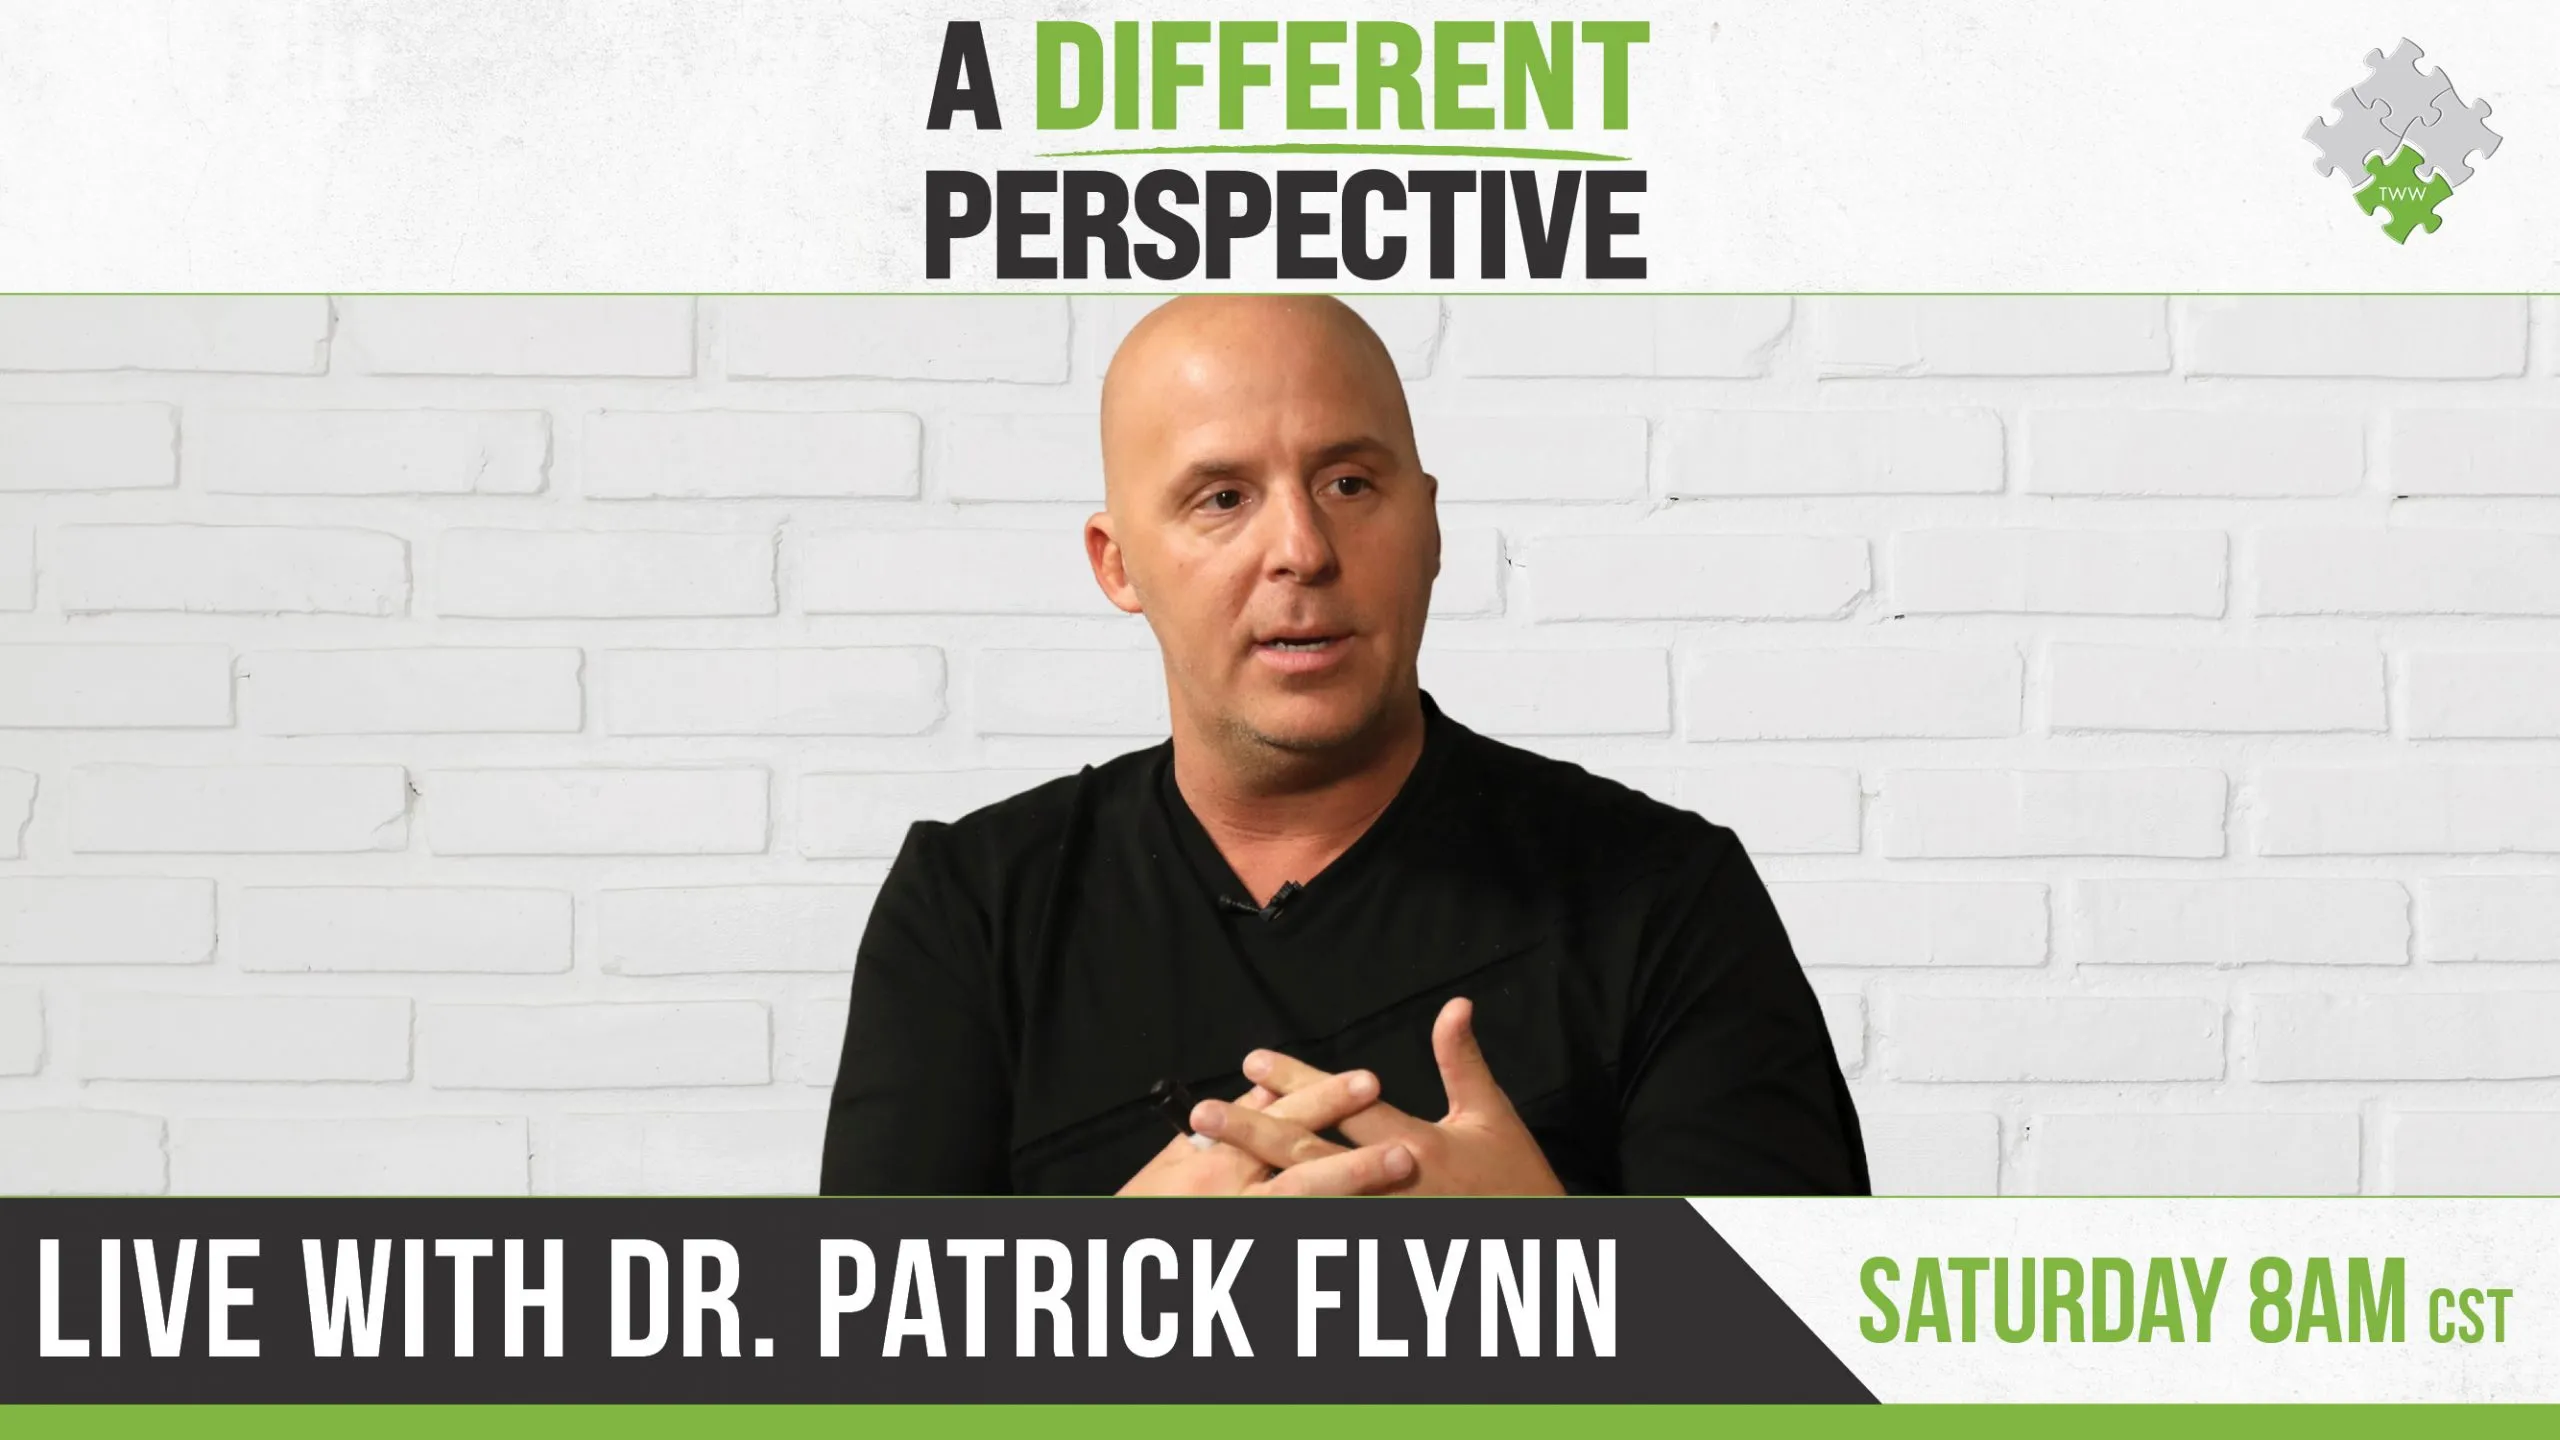 4.16.22 – “A Different Perspective with Dr. Patrick Flynn” Recap